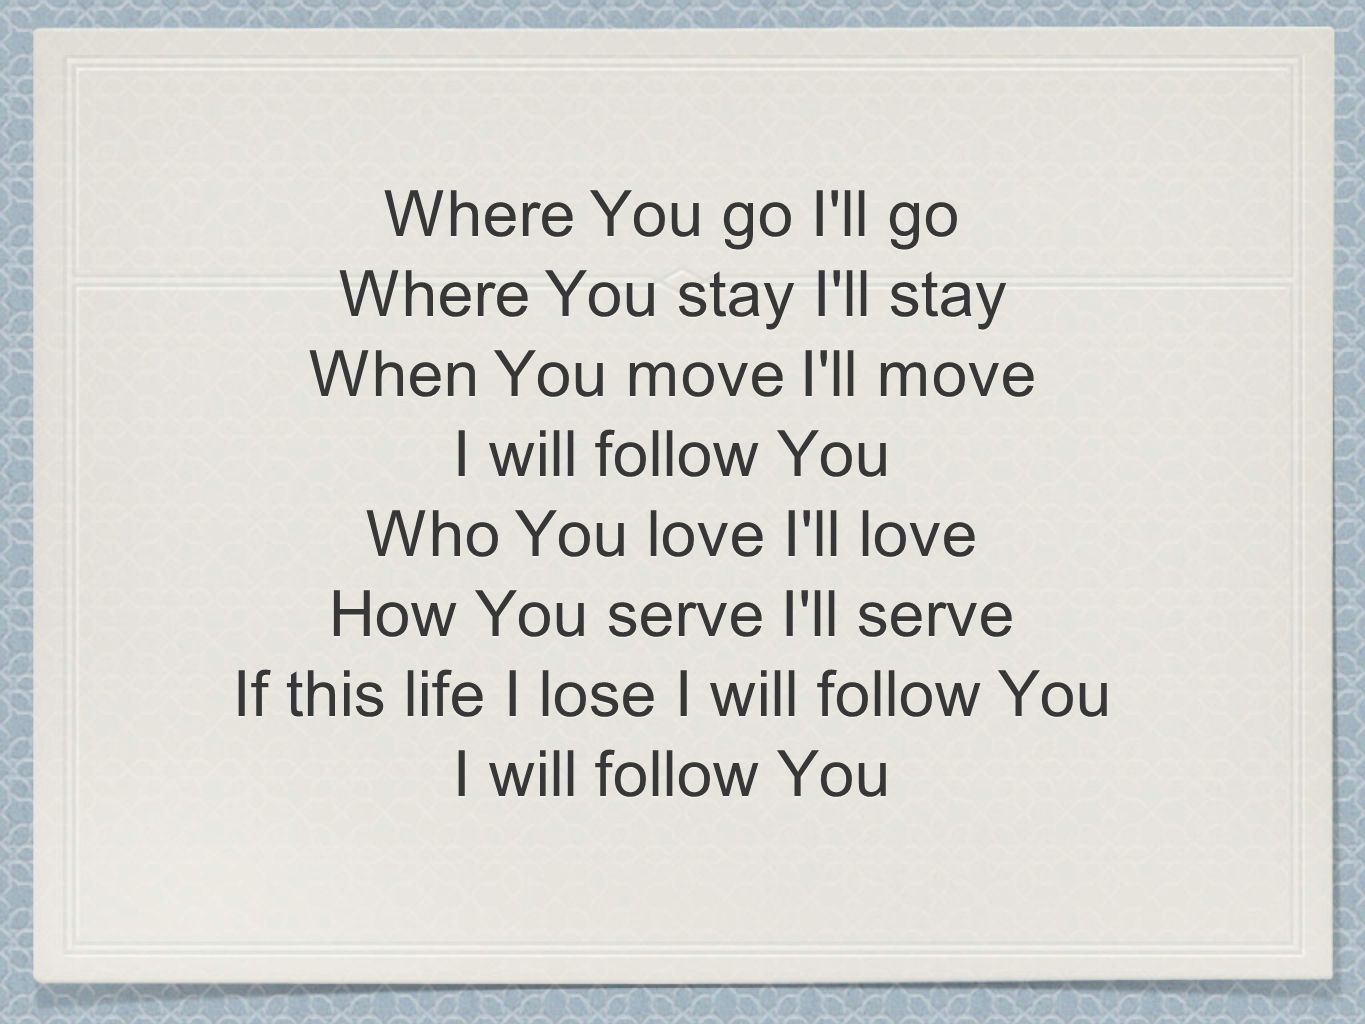 Where You go I ll go Where You stay I ll stay When You move I ll move I will follow You Who You love I ll love How You serve I ll serve If this life I lose I will follow You I will follow You